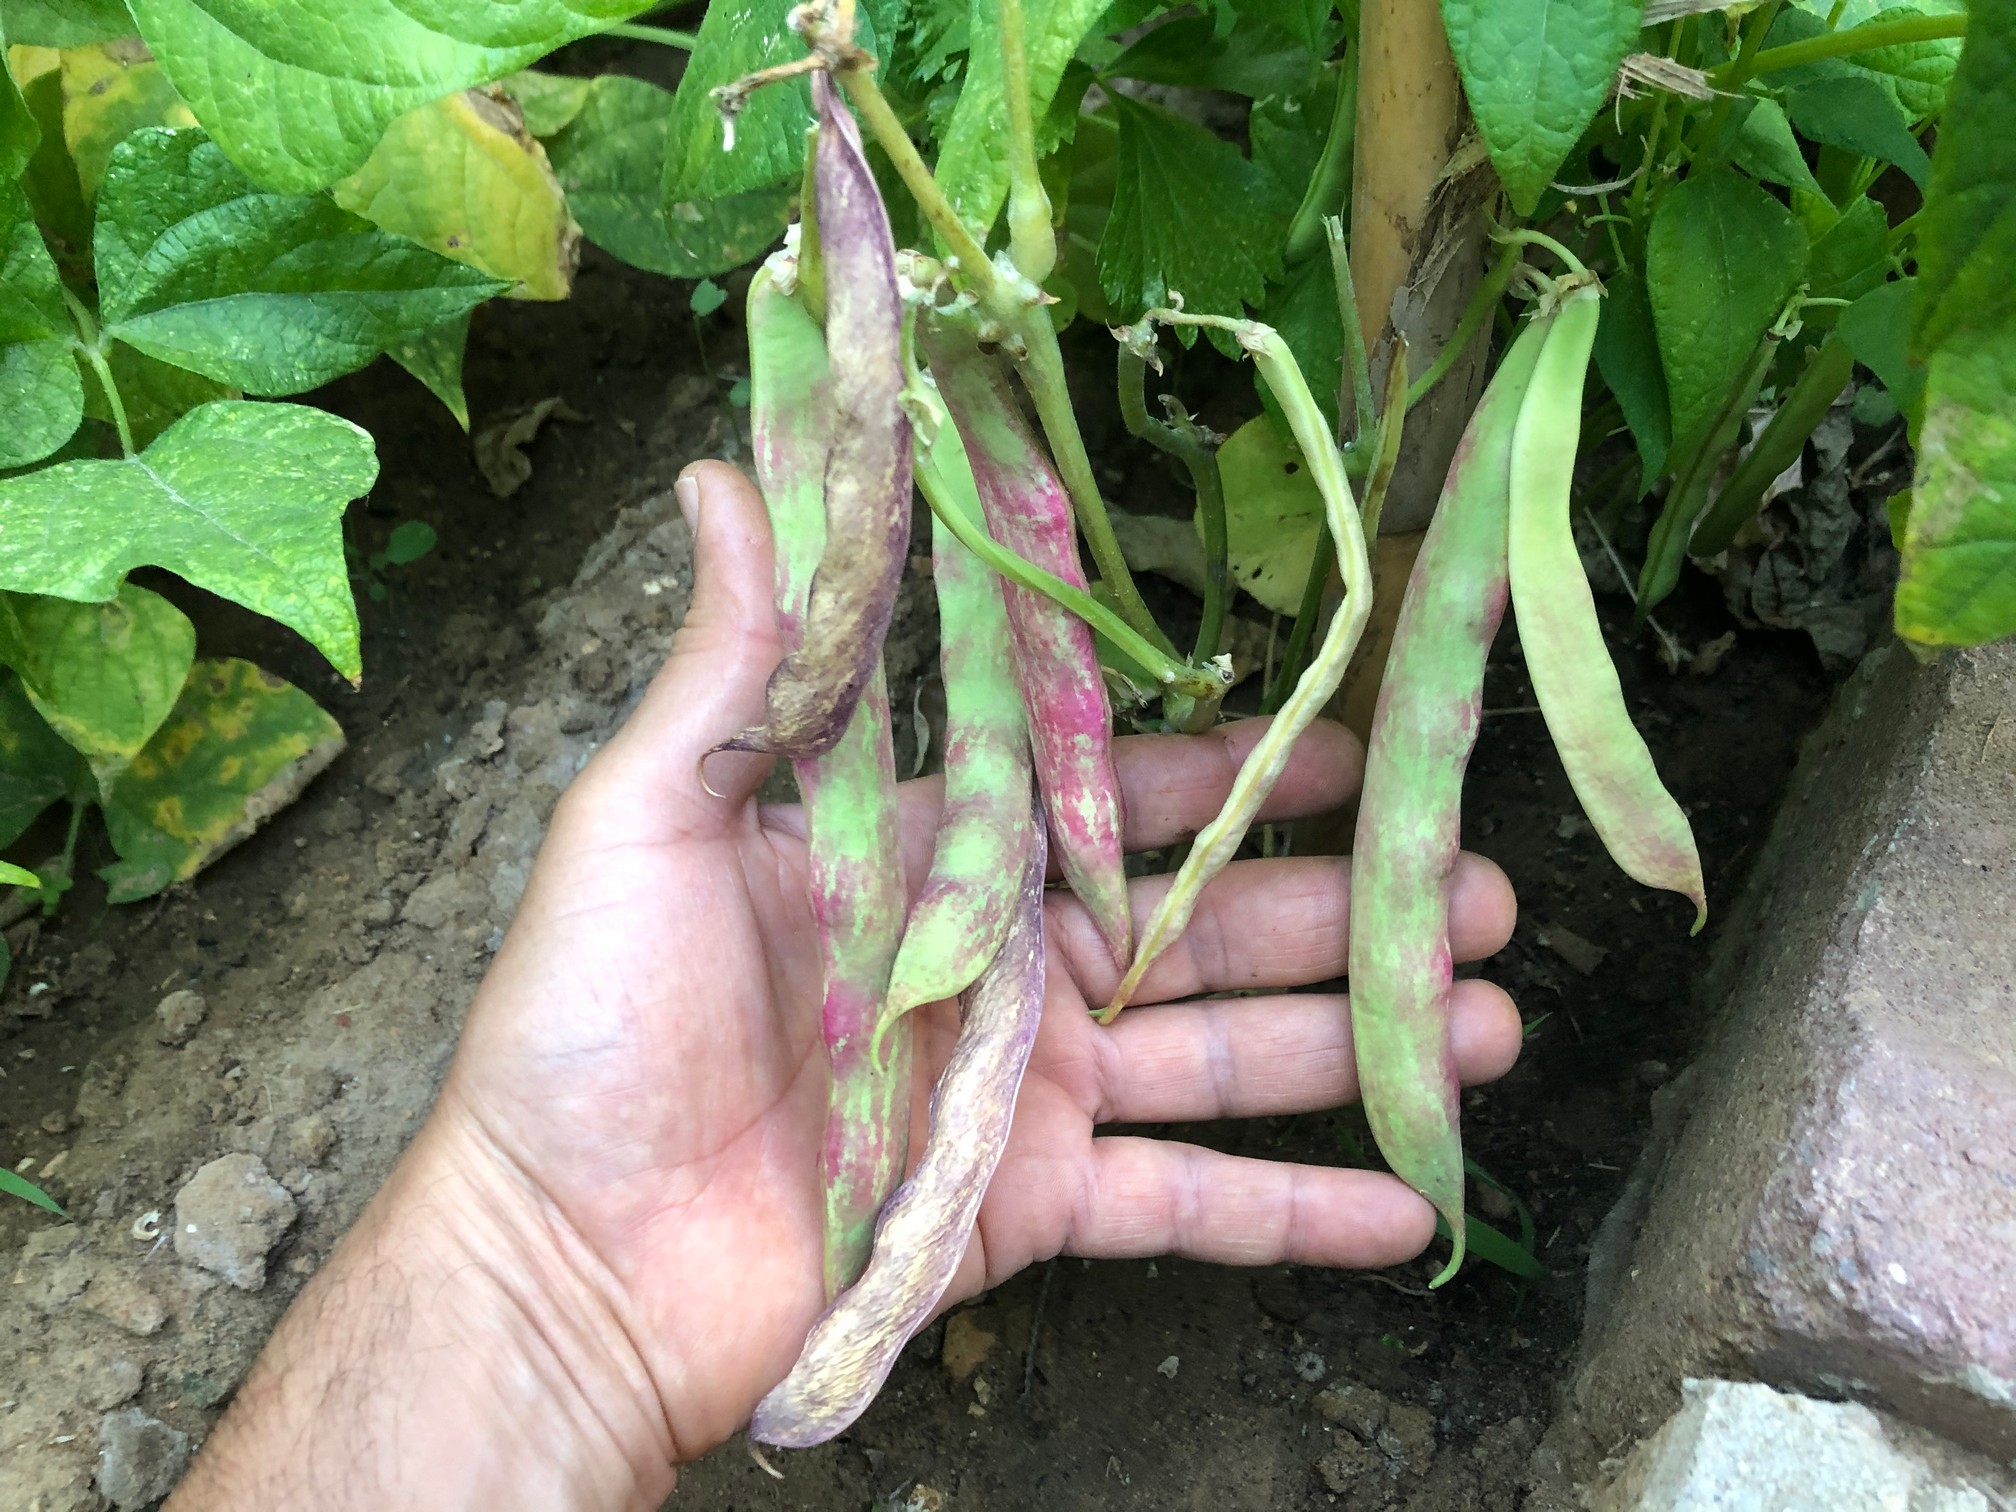 Dragon Tongue beans are some of the easiest veggies to grow. The seeds are a beautiful which makes them ideal for beginners and beloved by any veggie gardeners. They grow with little care, produce an abundance of pods and can add nitrogen to the garden soil